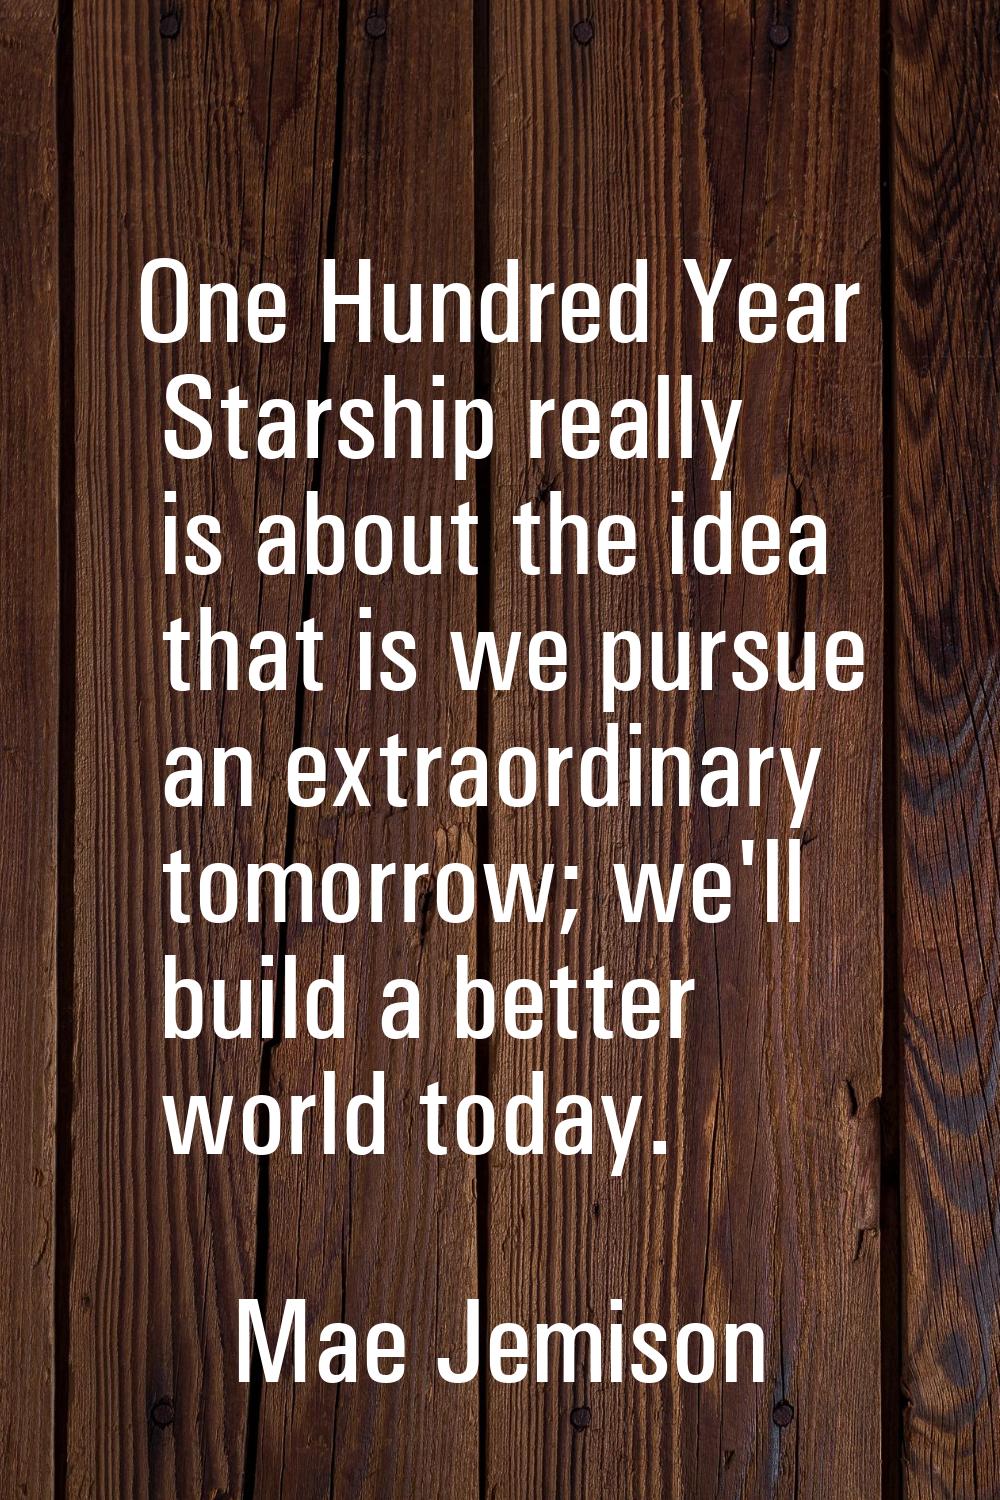 One Hundred Year Starship really is about the idea that is we pursue an extraordinary tomorrow; we'